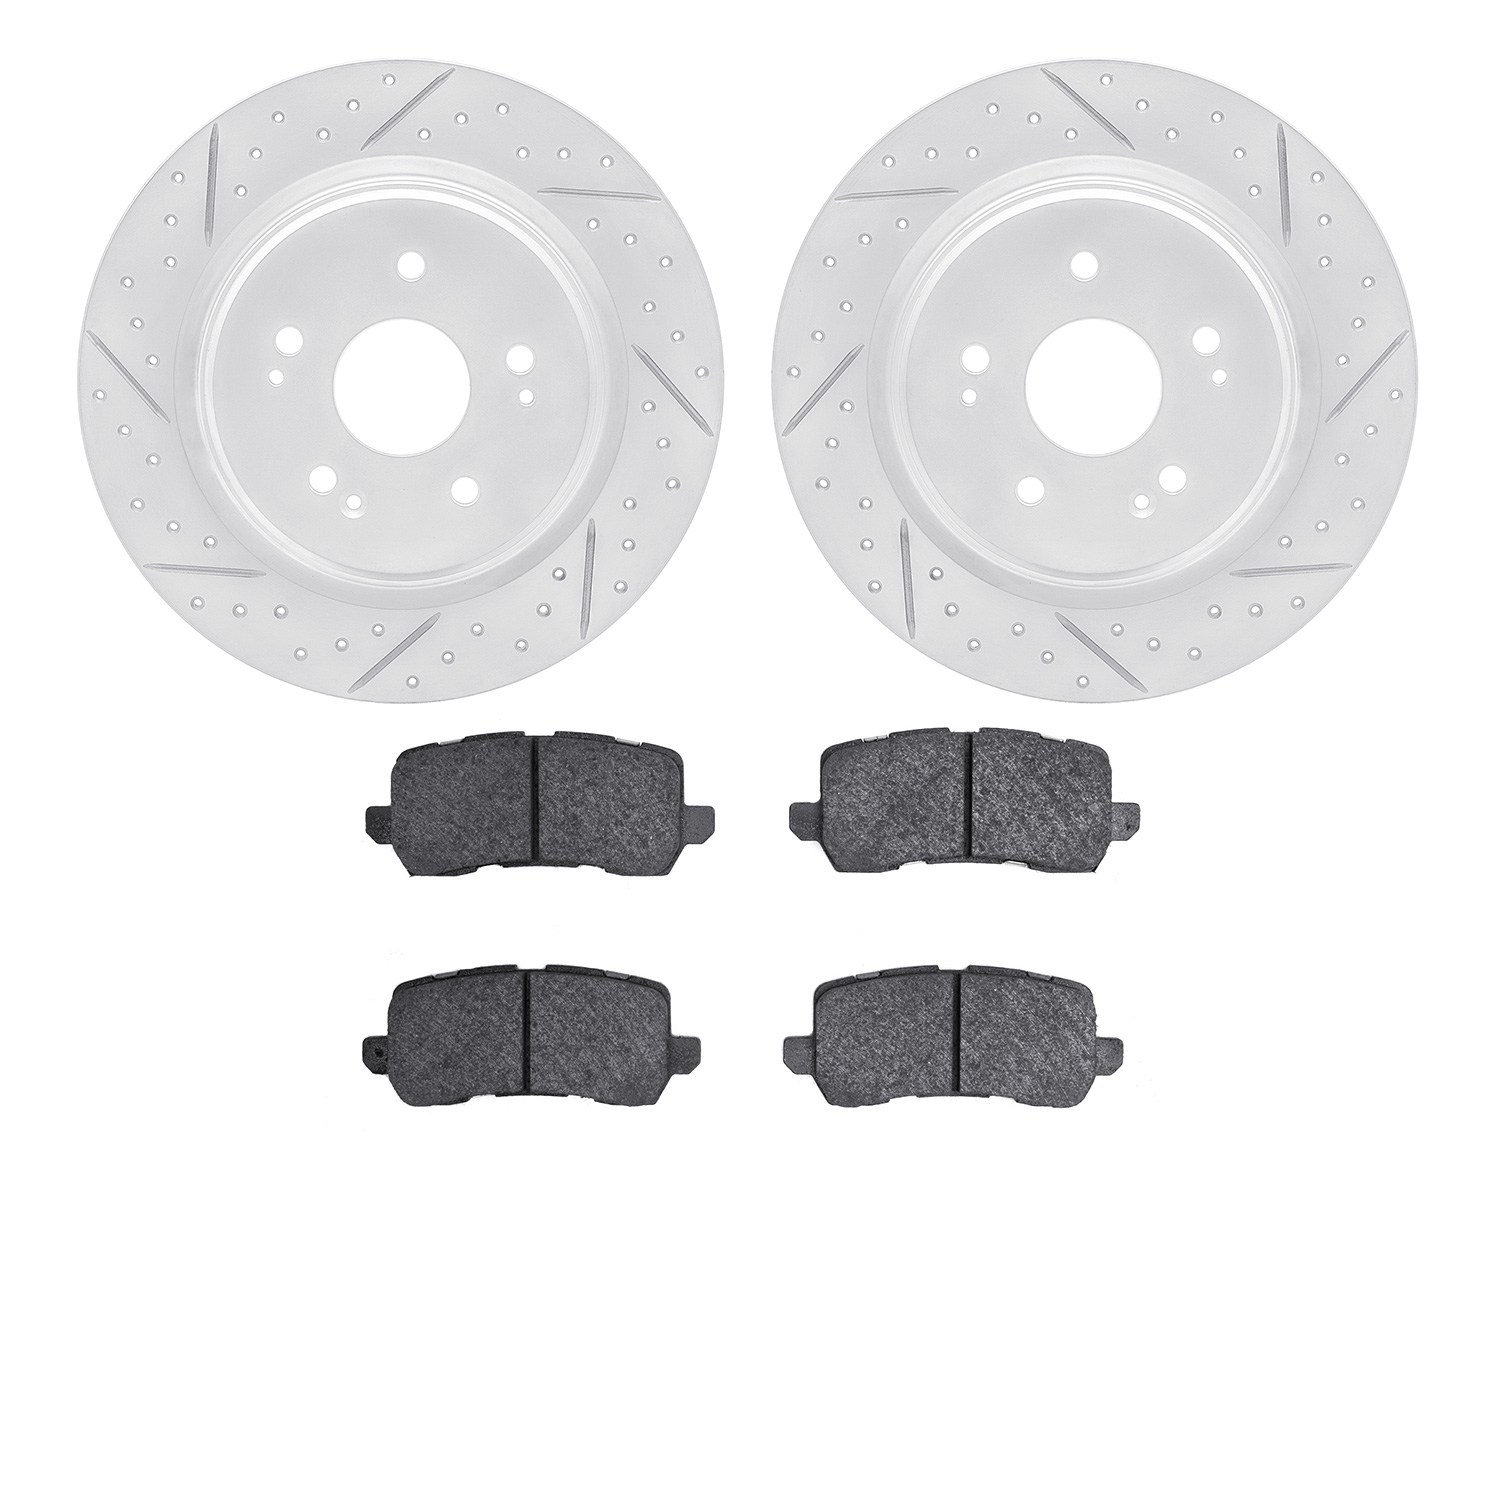 2502-58023 Geoperformance Drilled/Slotted Rotors w/5000 Advanced Brake Pads Kit, 2015-2020 Acura/Honda, Position: Rear